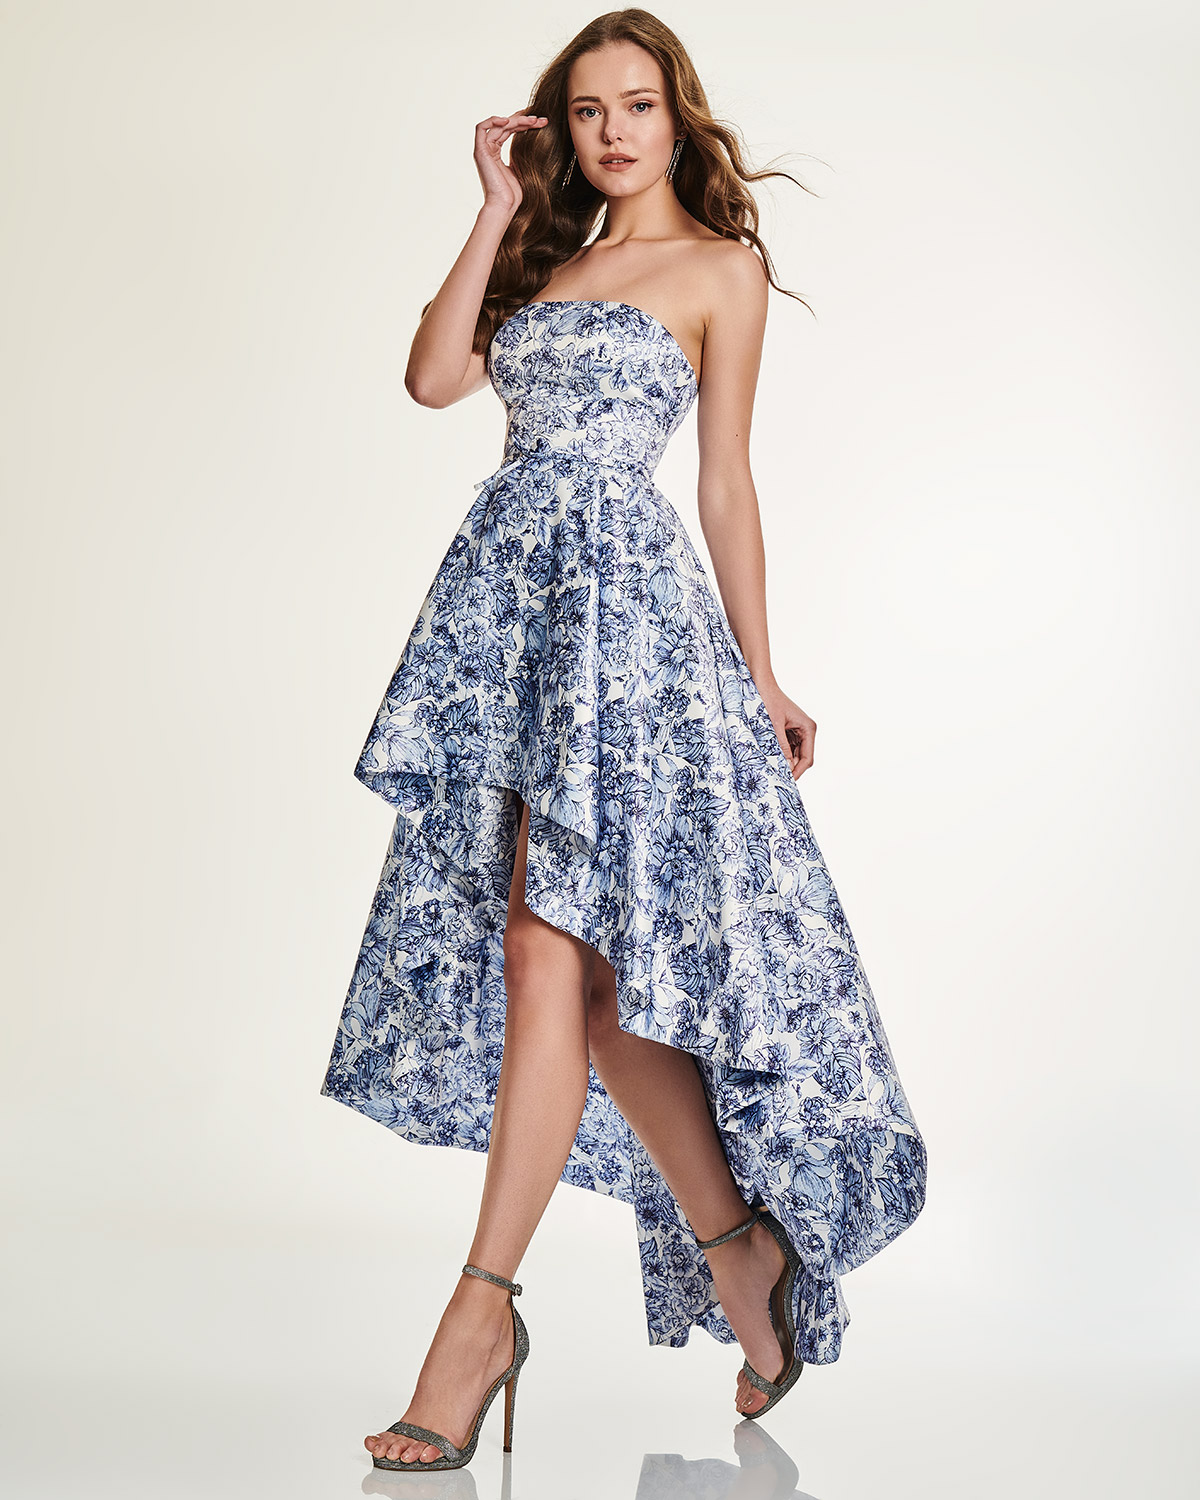 Cocktail asymmetrical strapless dress with floral motif